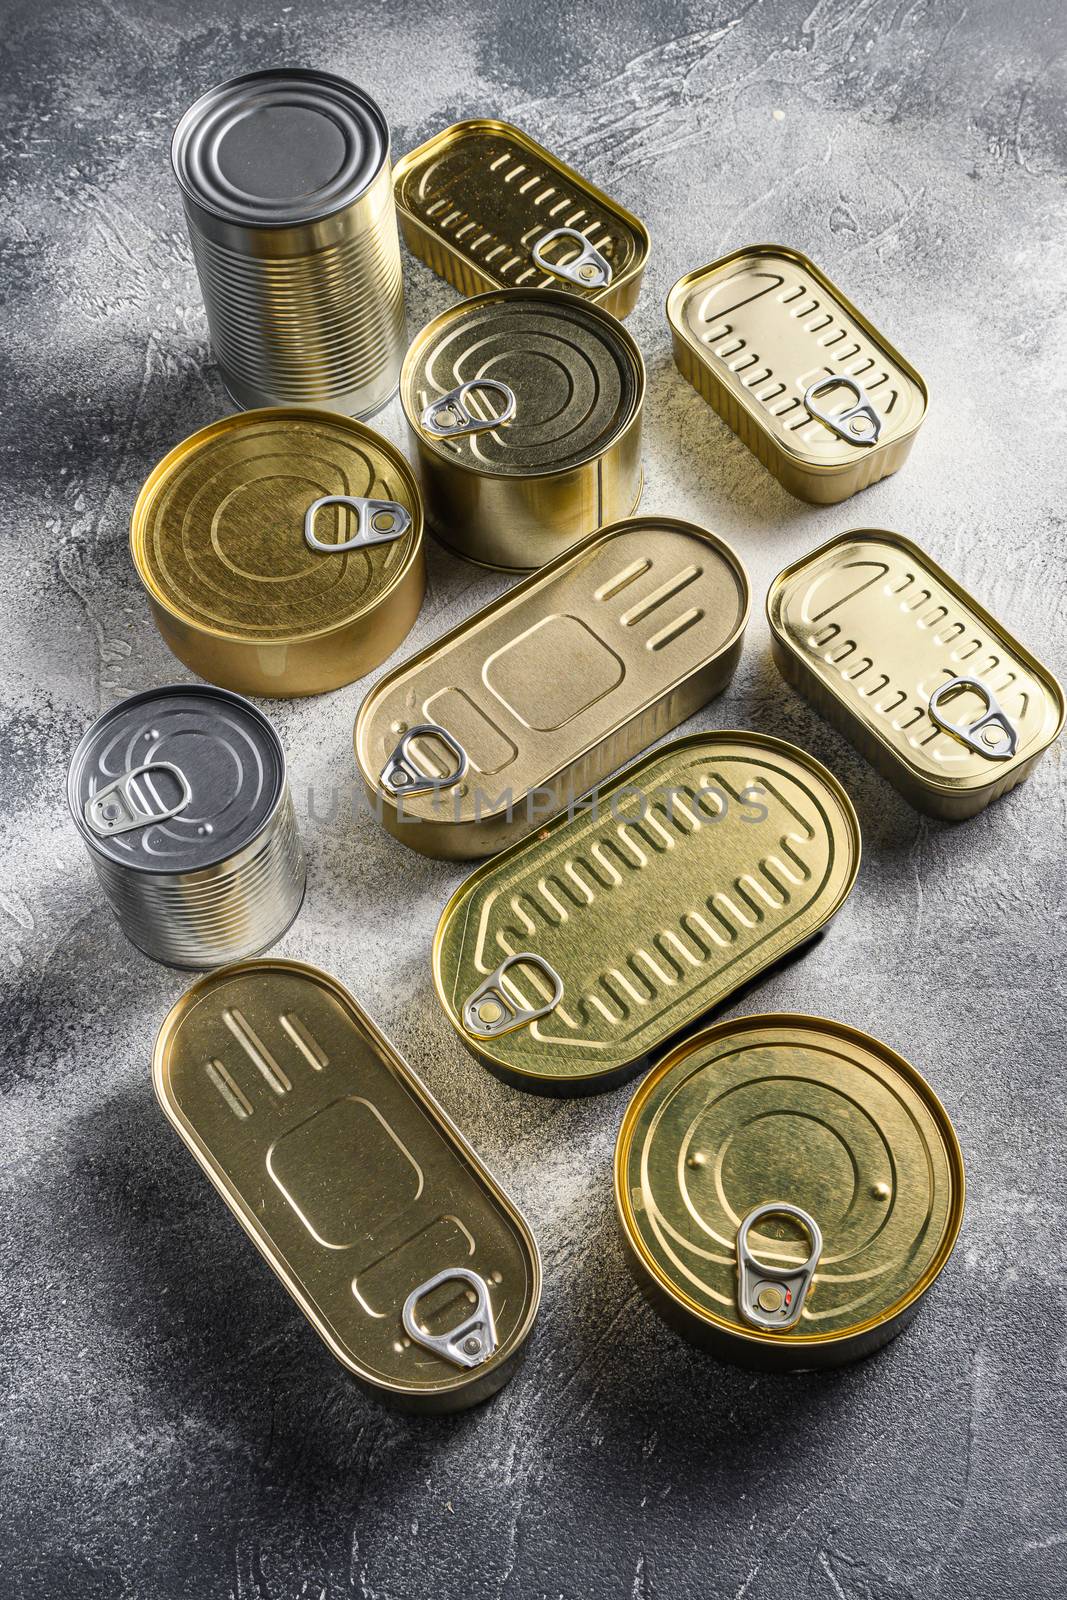 Assortment of cans of canned with different types of shapes top view on grey rustic background side view.